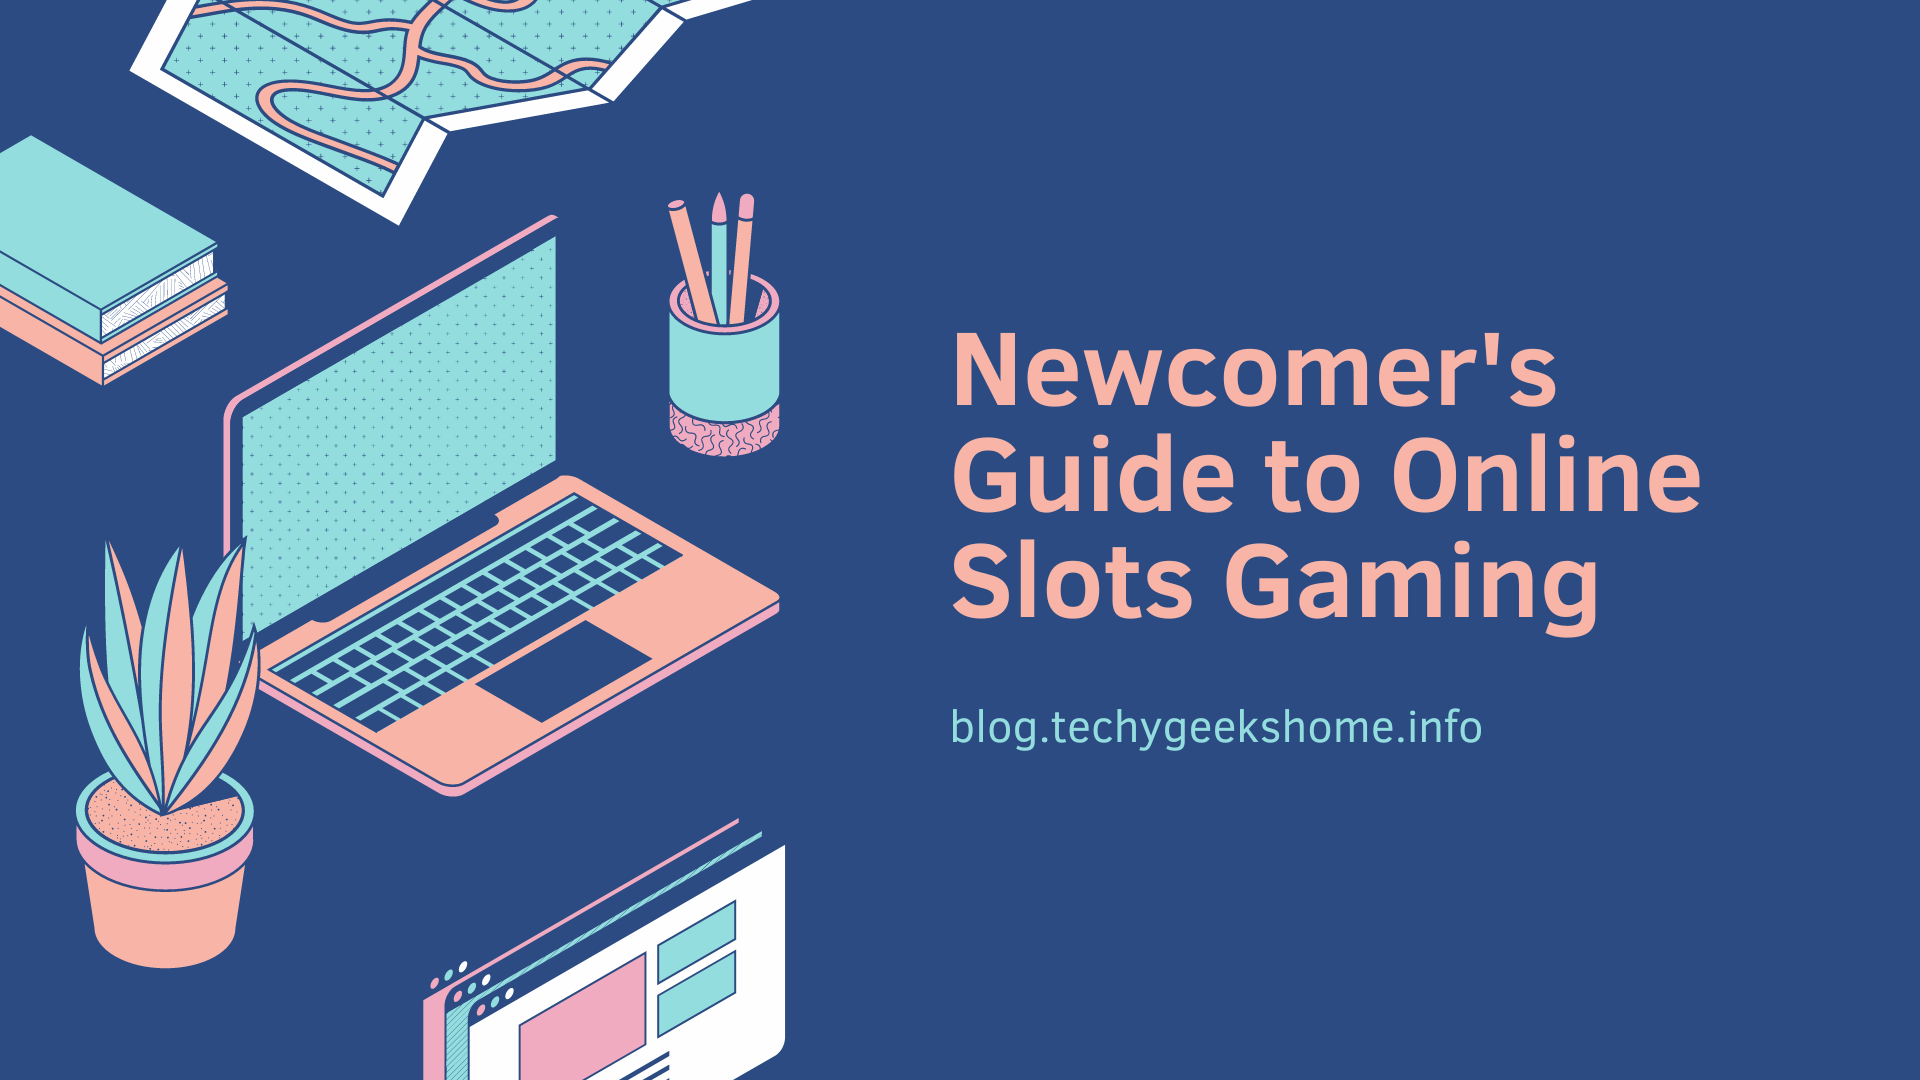 Newcomer’s Guide to Online Slots Gaming